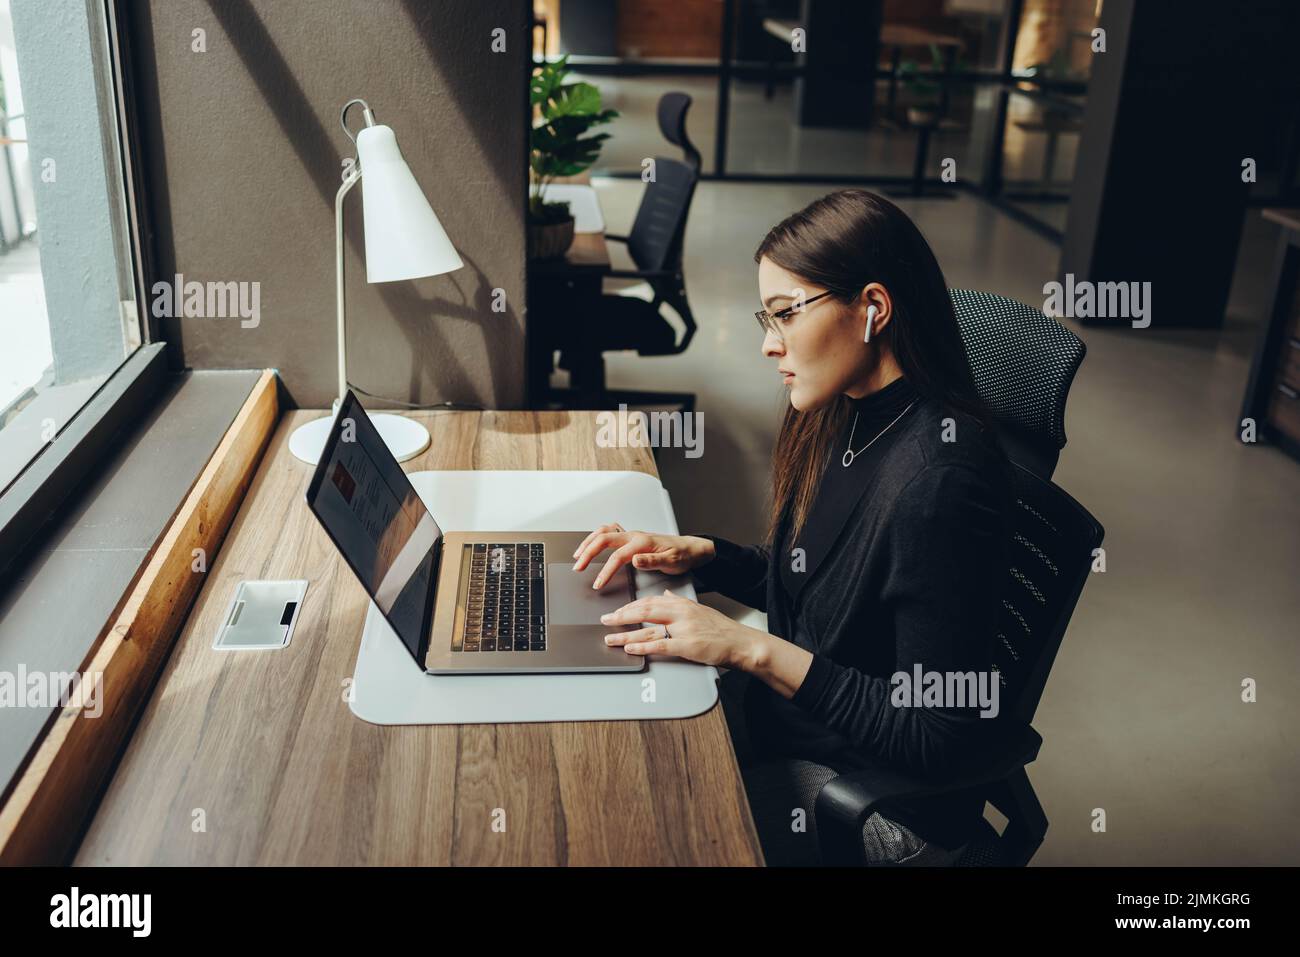 Focused young businesswoman using a laptop and wireless earphones while working alone. Young female entrepreneur working remotely in a modern co-worki Stock Photo